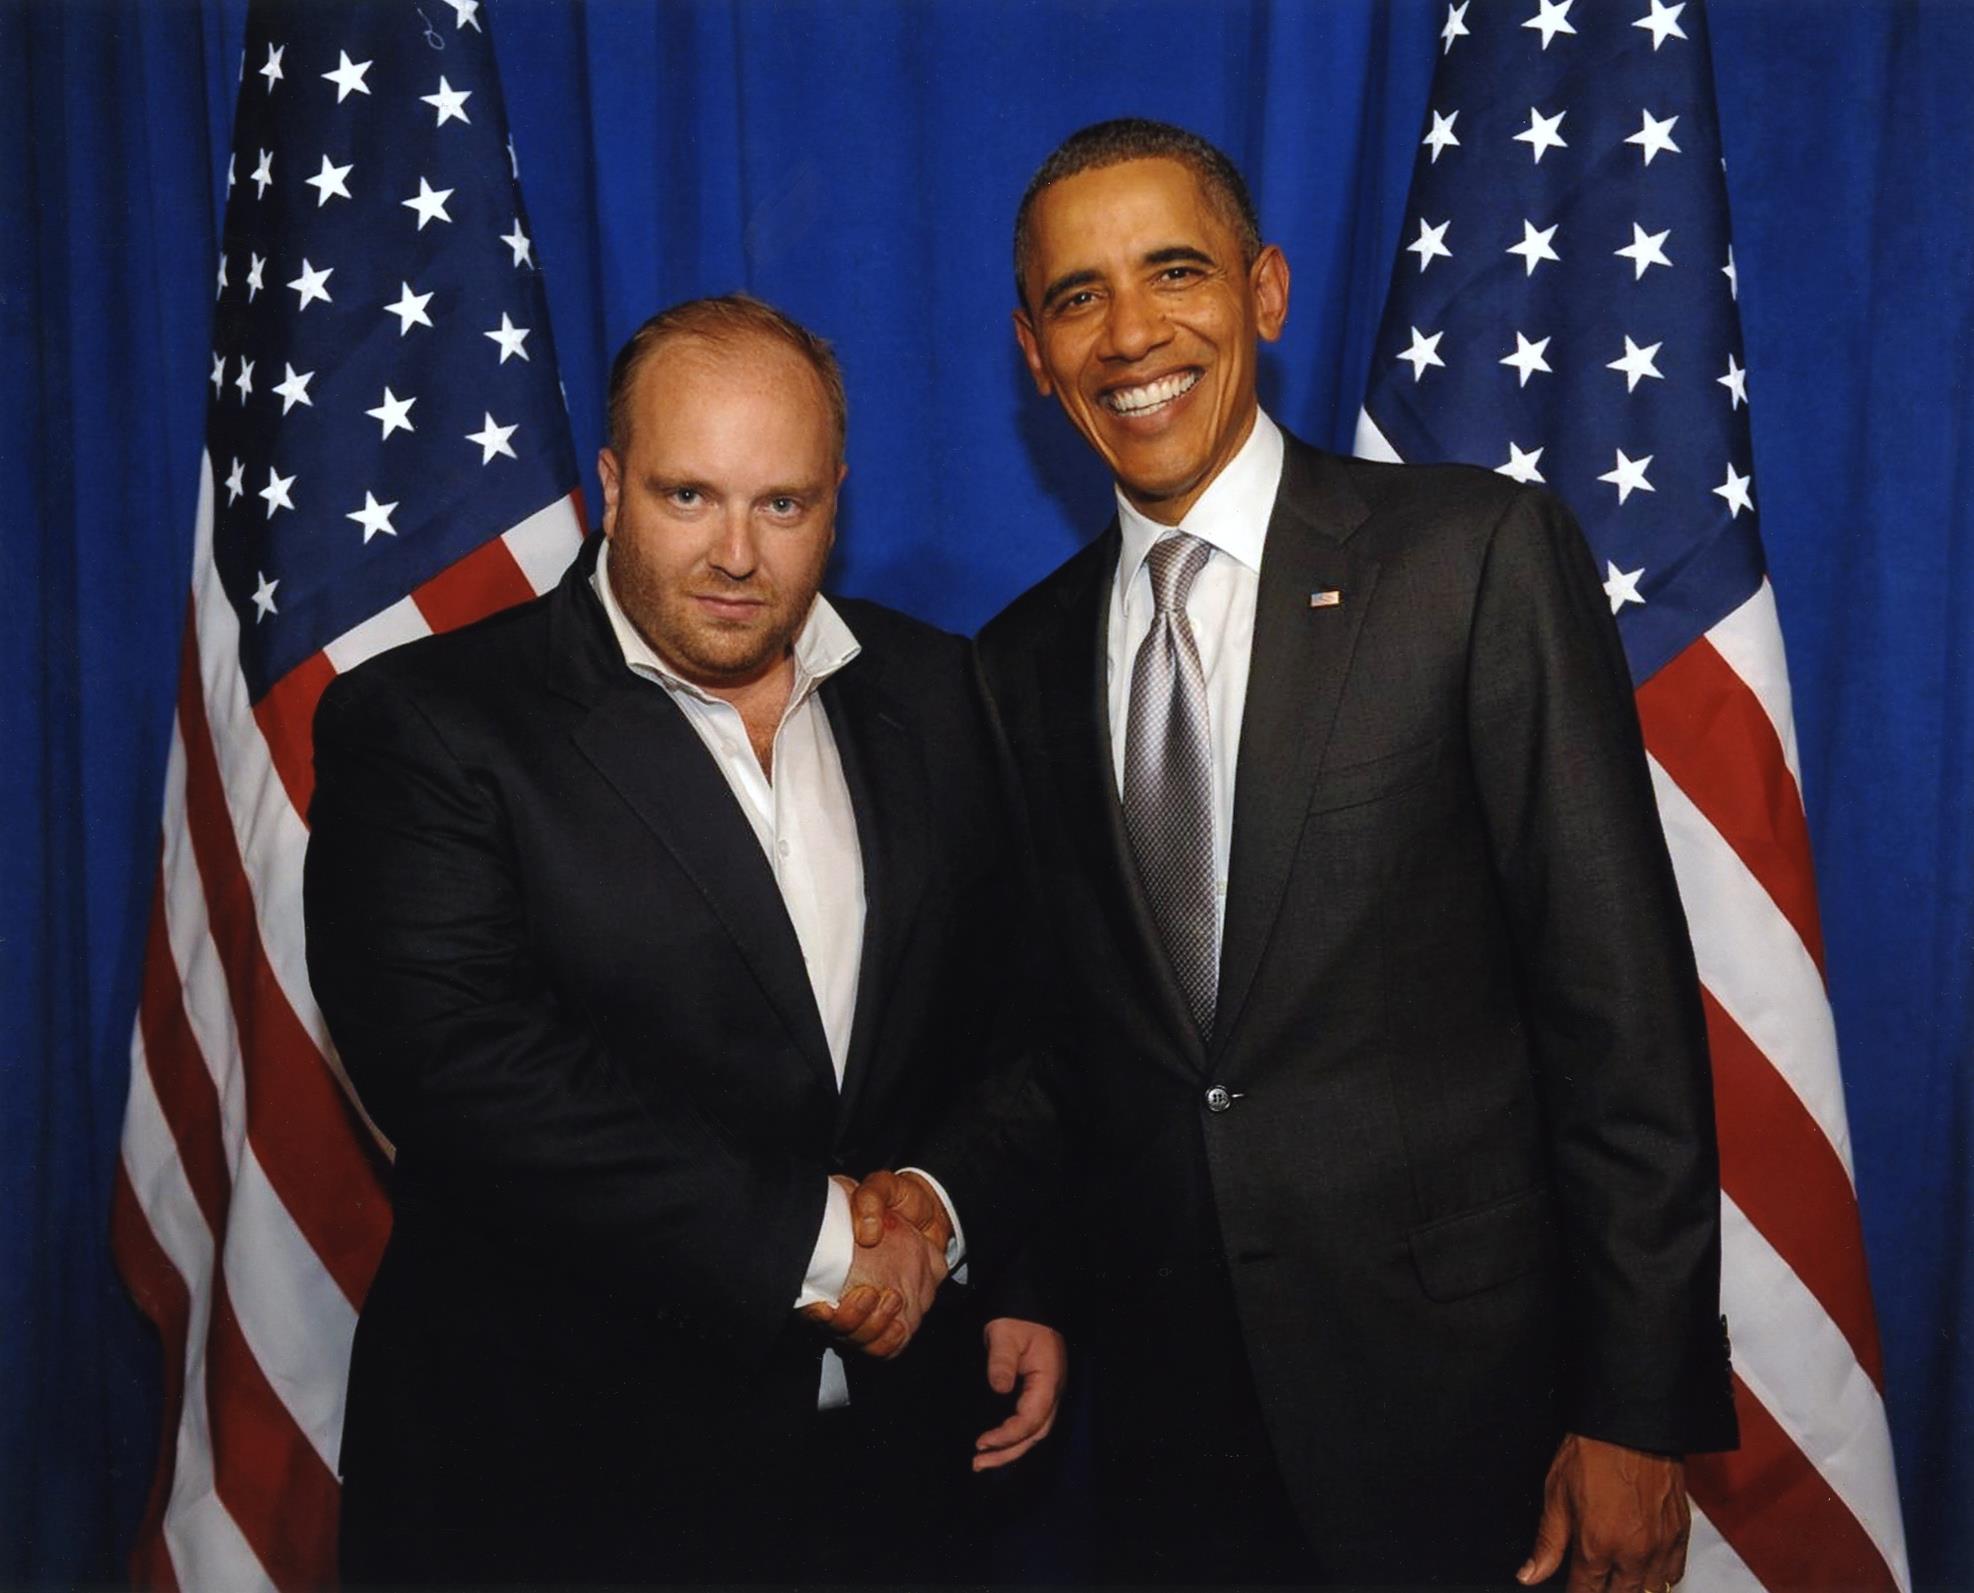 Ukrainian Operative For Jailed Naked Women In Dubai Says He’s Friends With Obama